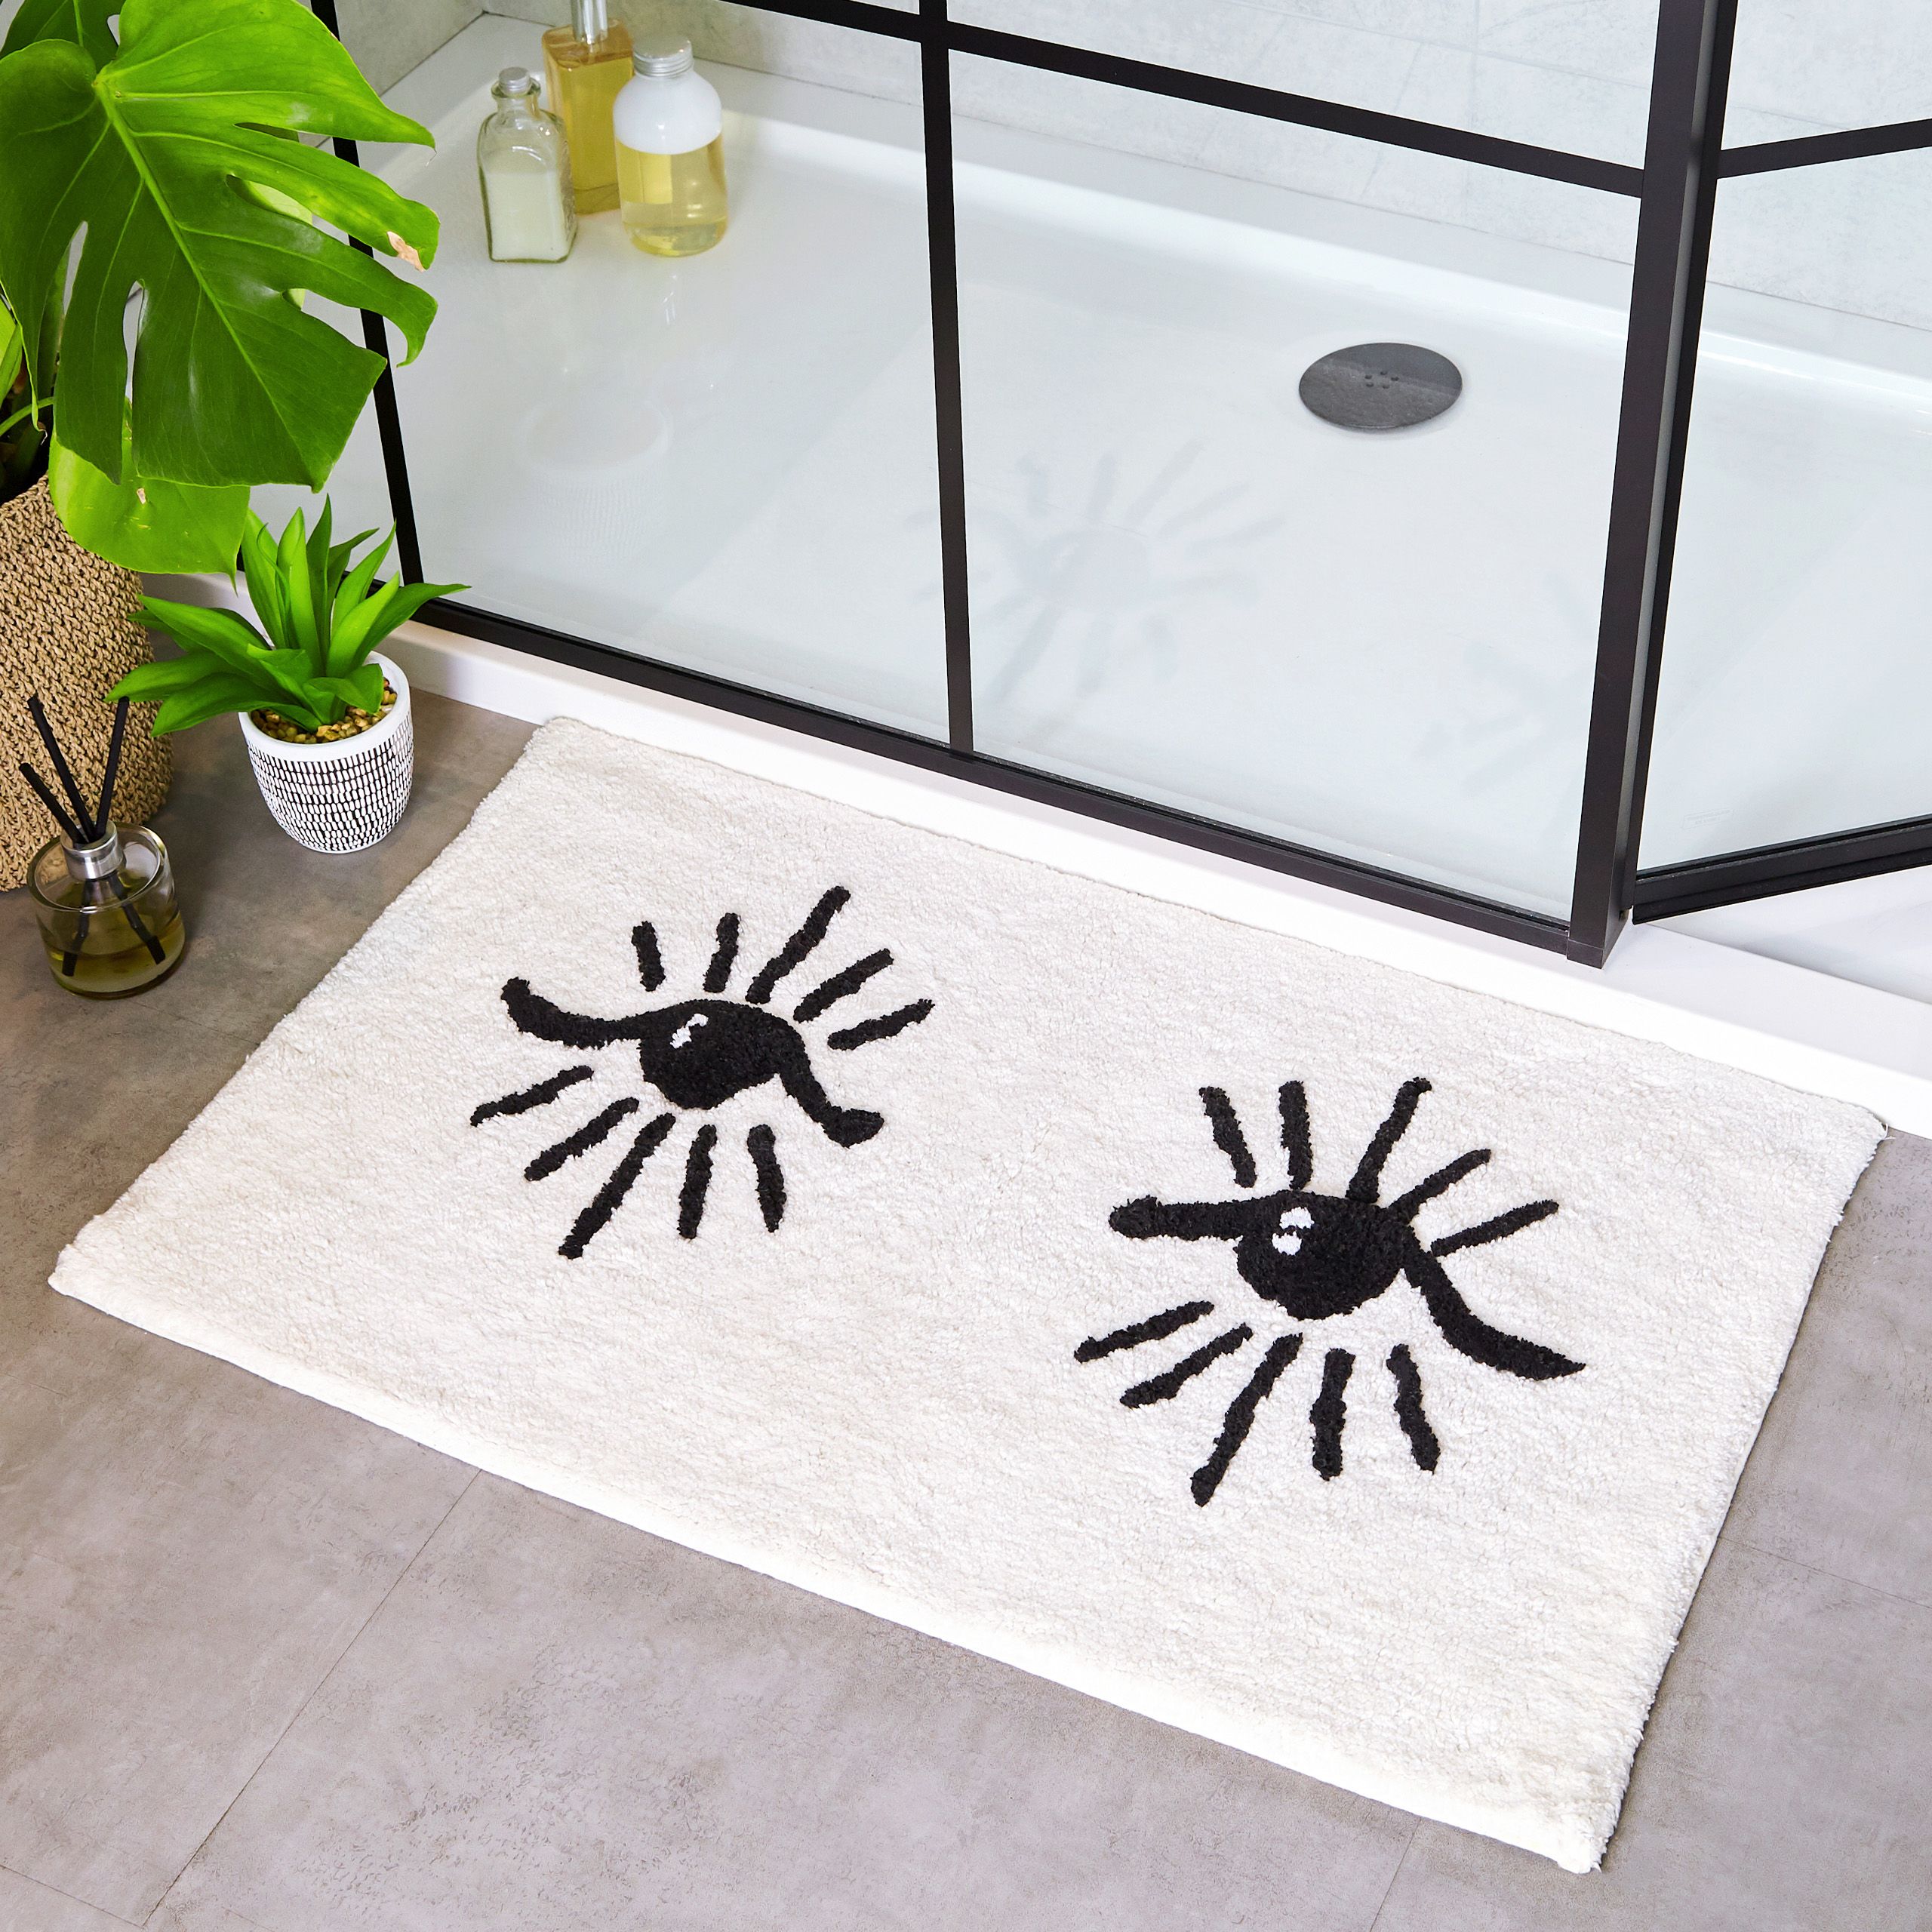 Featuring an abstract eye design, in three stunning colourways. Made from 100% Cotton, making this bath mat incredibly soft under foot. This bath mat has an anti-slip quality, keeping it securely in place on your bathroom floor. The 1800 GSM ensures this bath mat is super absorbent preventing post-bath or shower puddles.